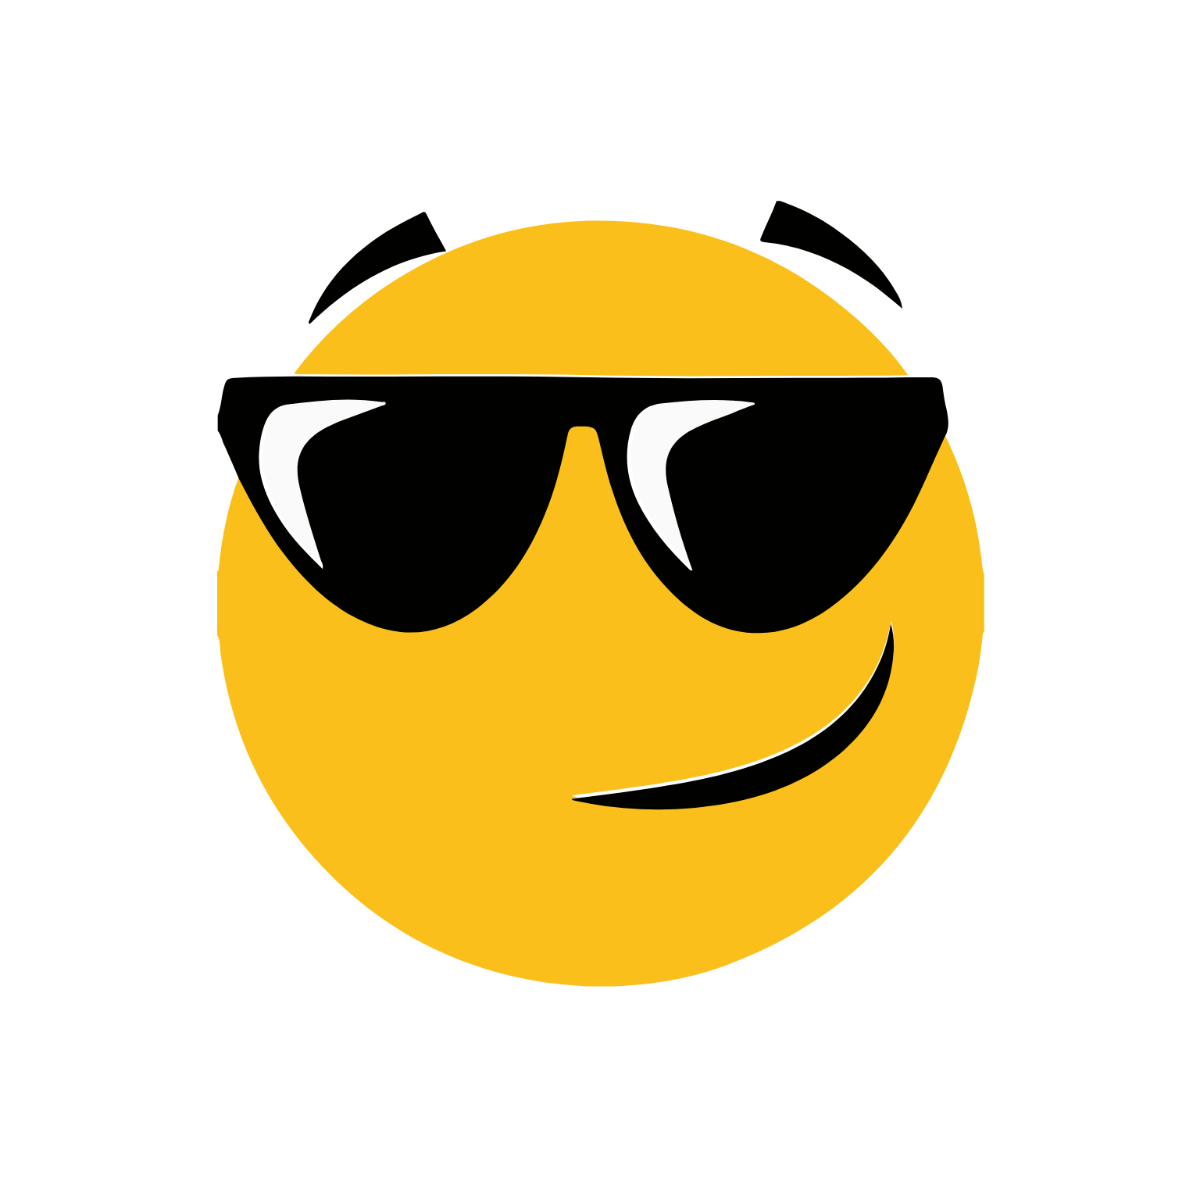 Free Smiley Face Sunglasses clipart Template